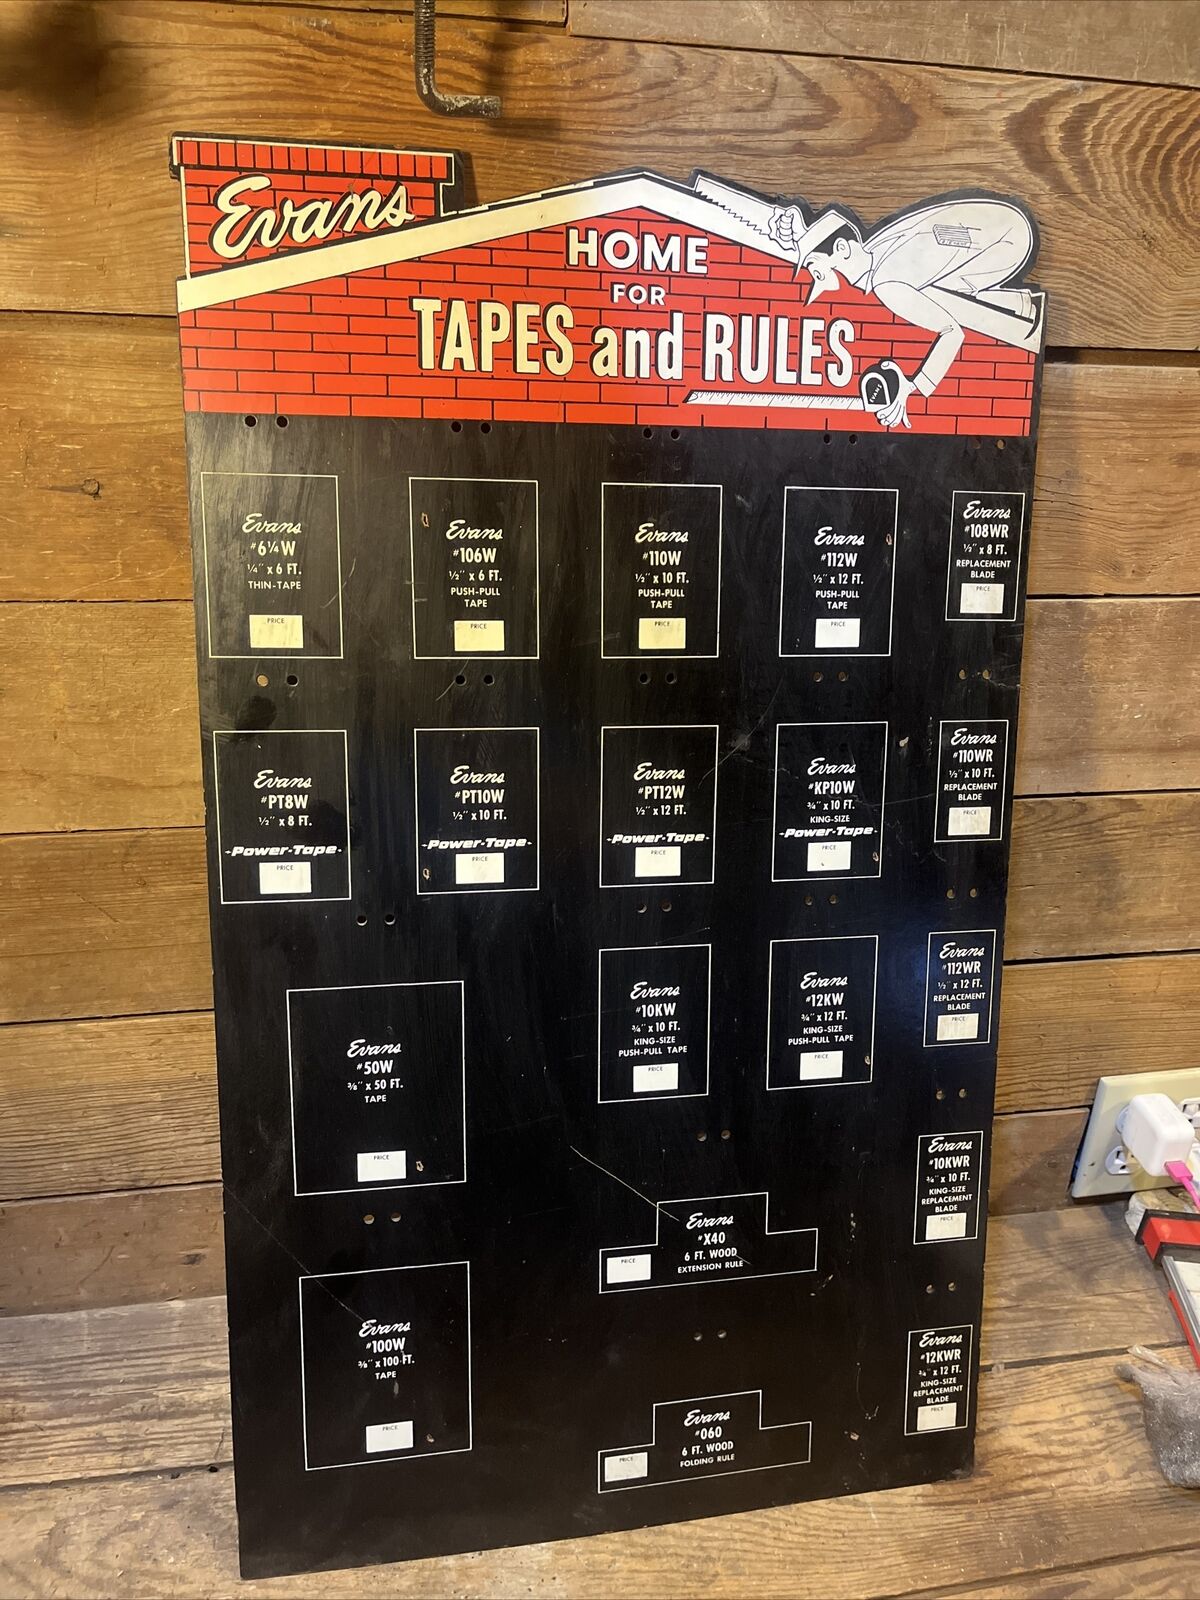 Vintage Evans Sign Tapes And Rules Advertising Store Tools Rack Display Old Home